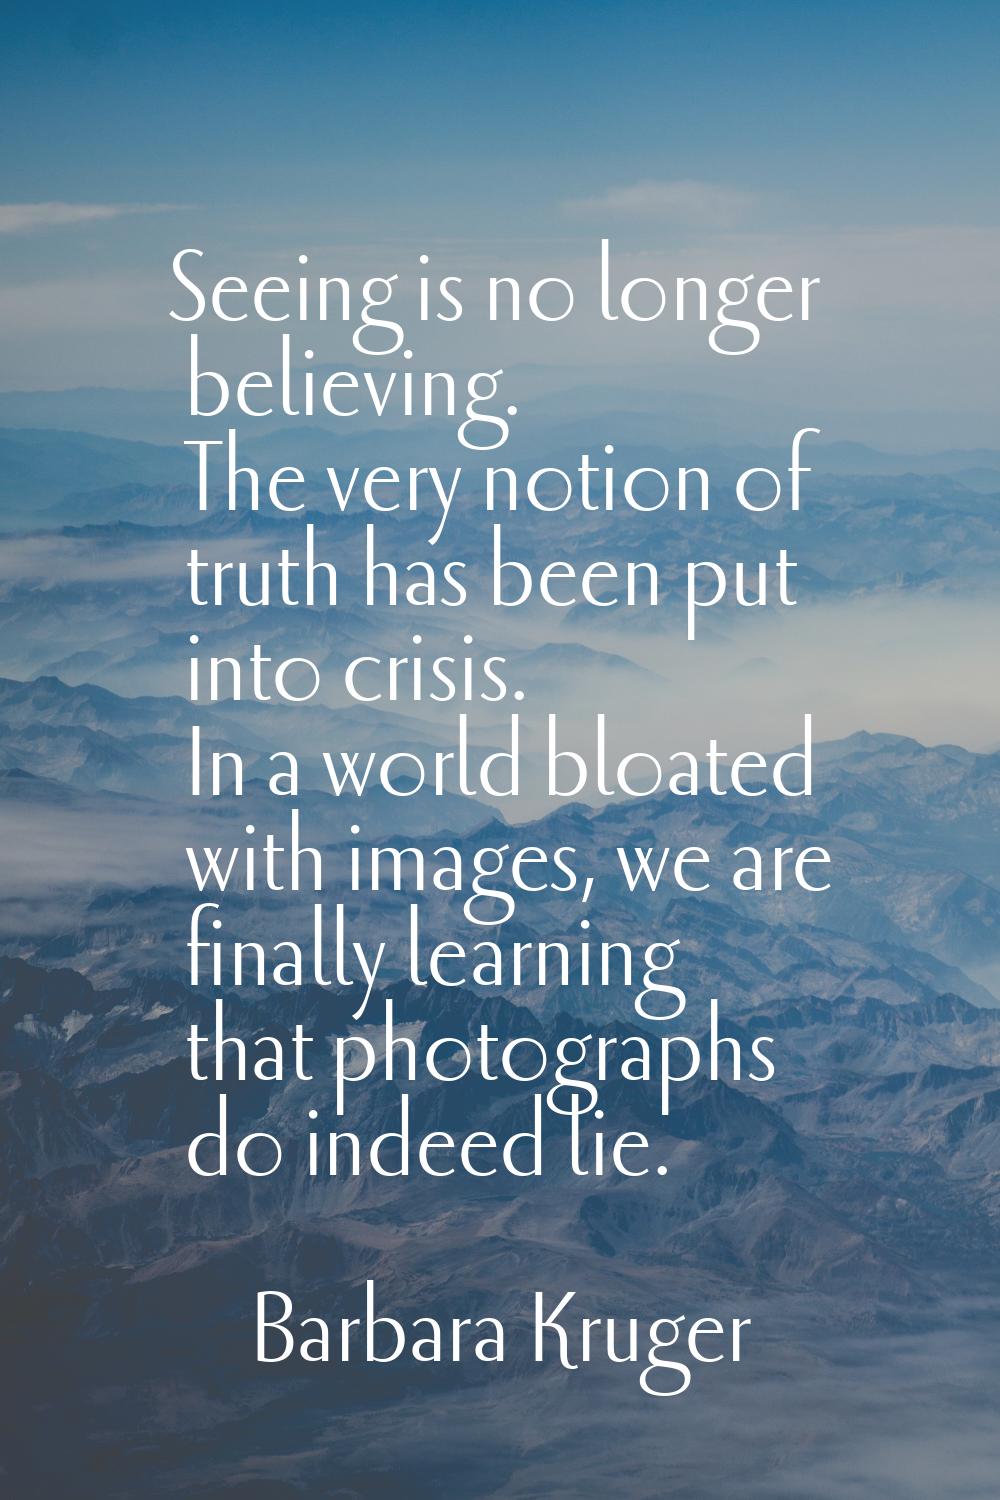 Seeing is no longer believing. The very notion of truth has been put into crisis. In a world bloate